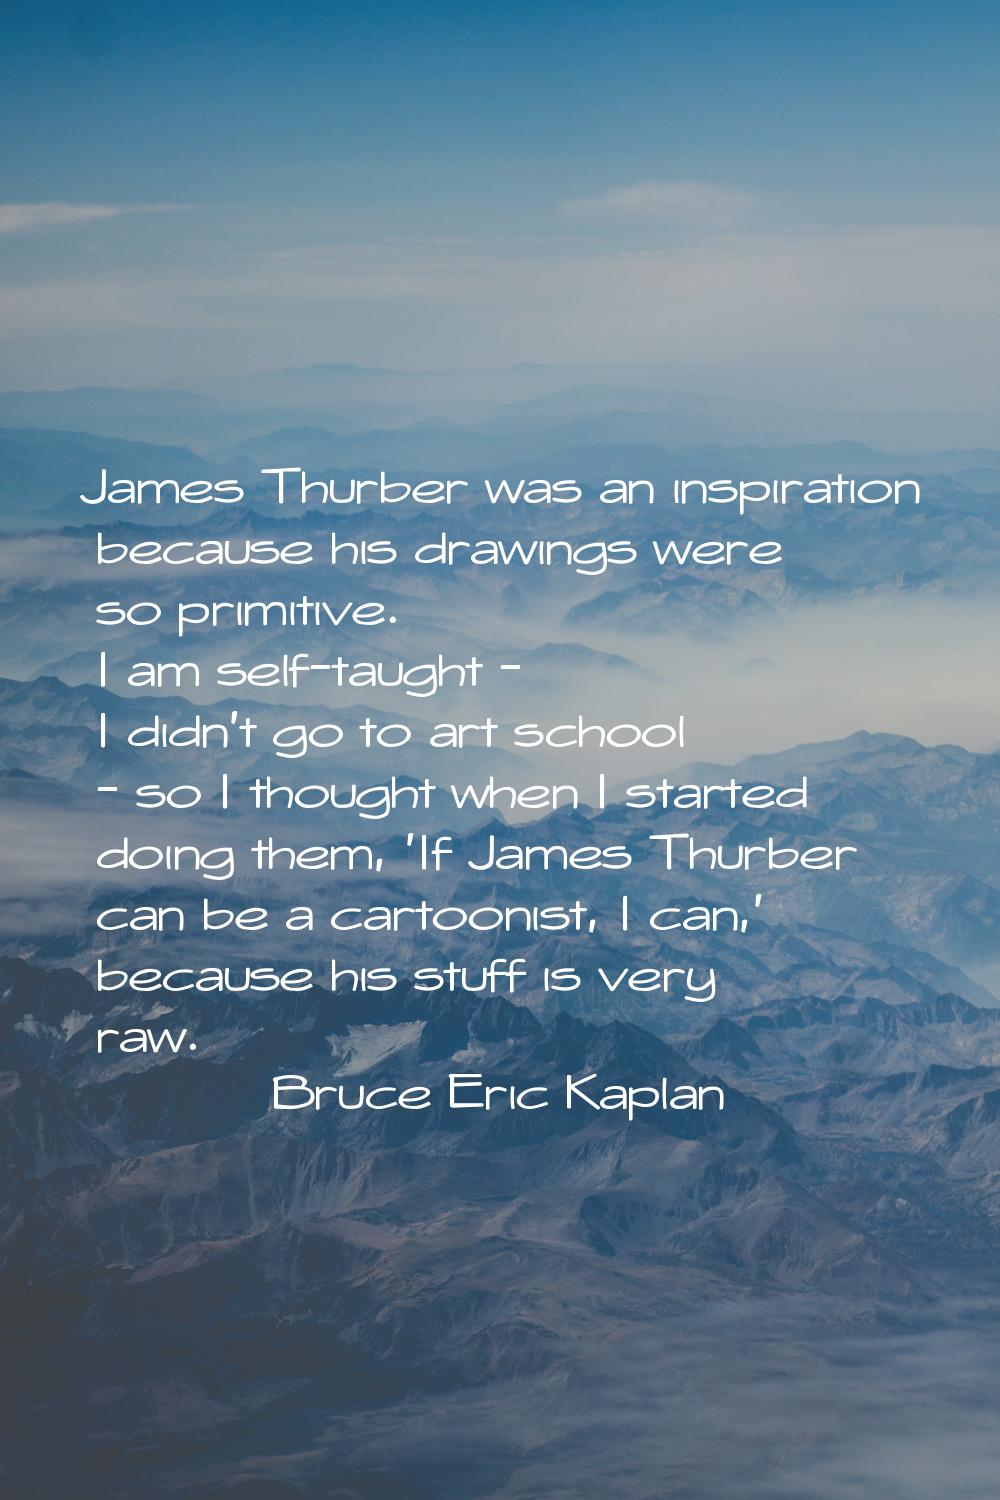 James Thurber was an inspiration because his drawings were so primitive. I am self-taught - I didn'